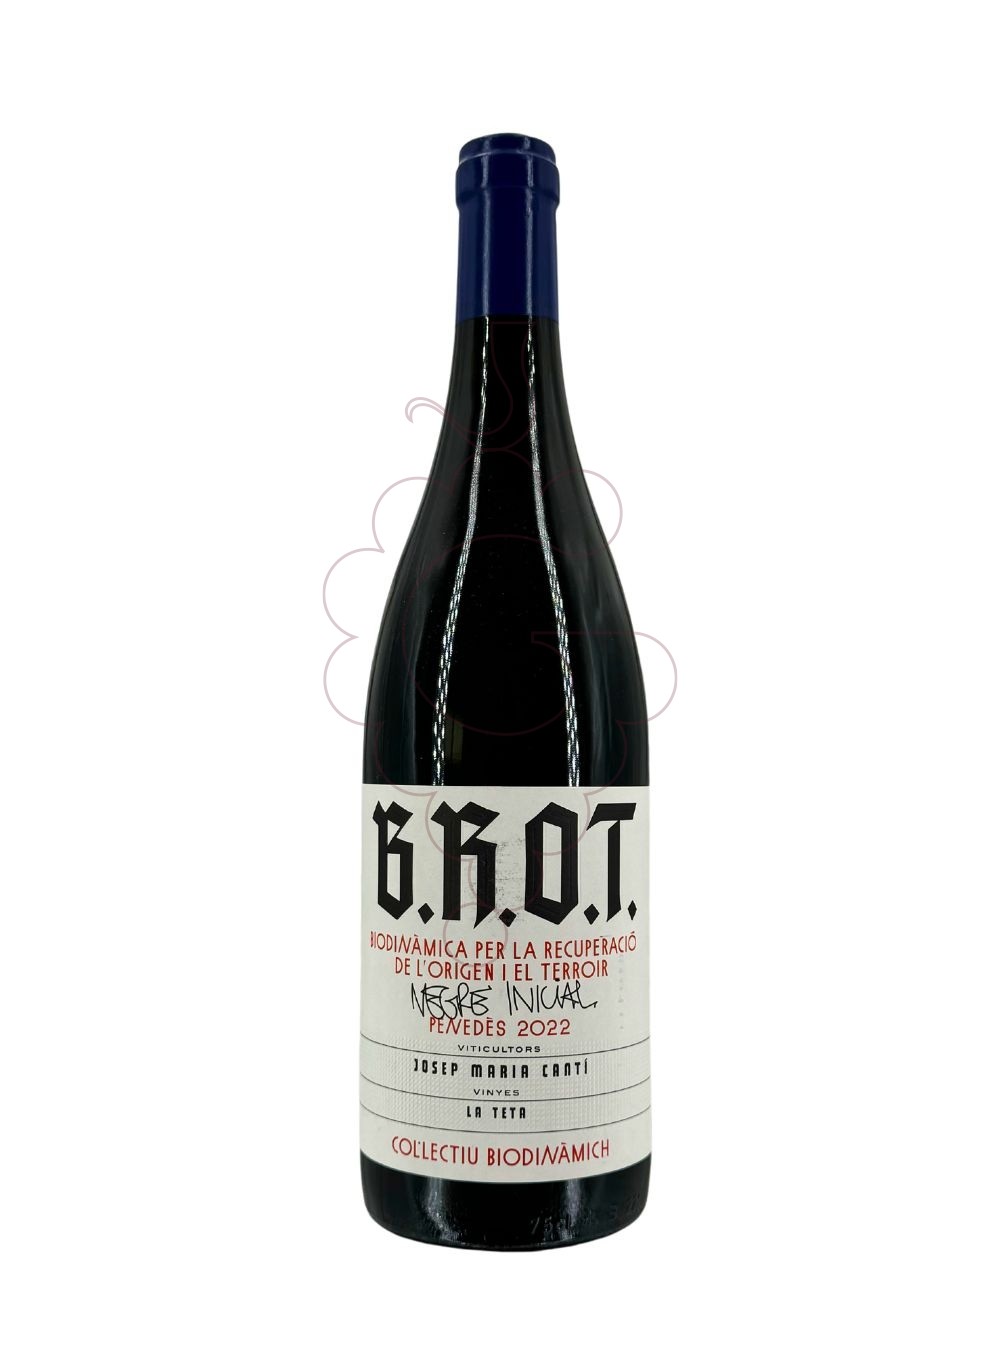 Photo B.R.O.T. Negre Inicial red wine